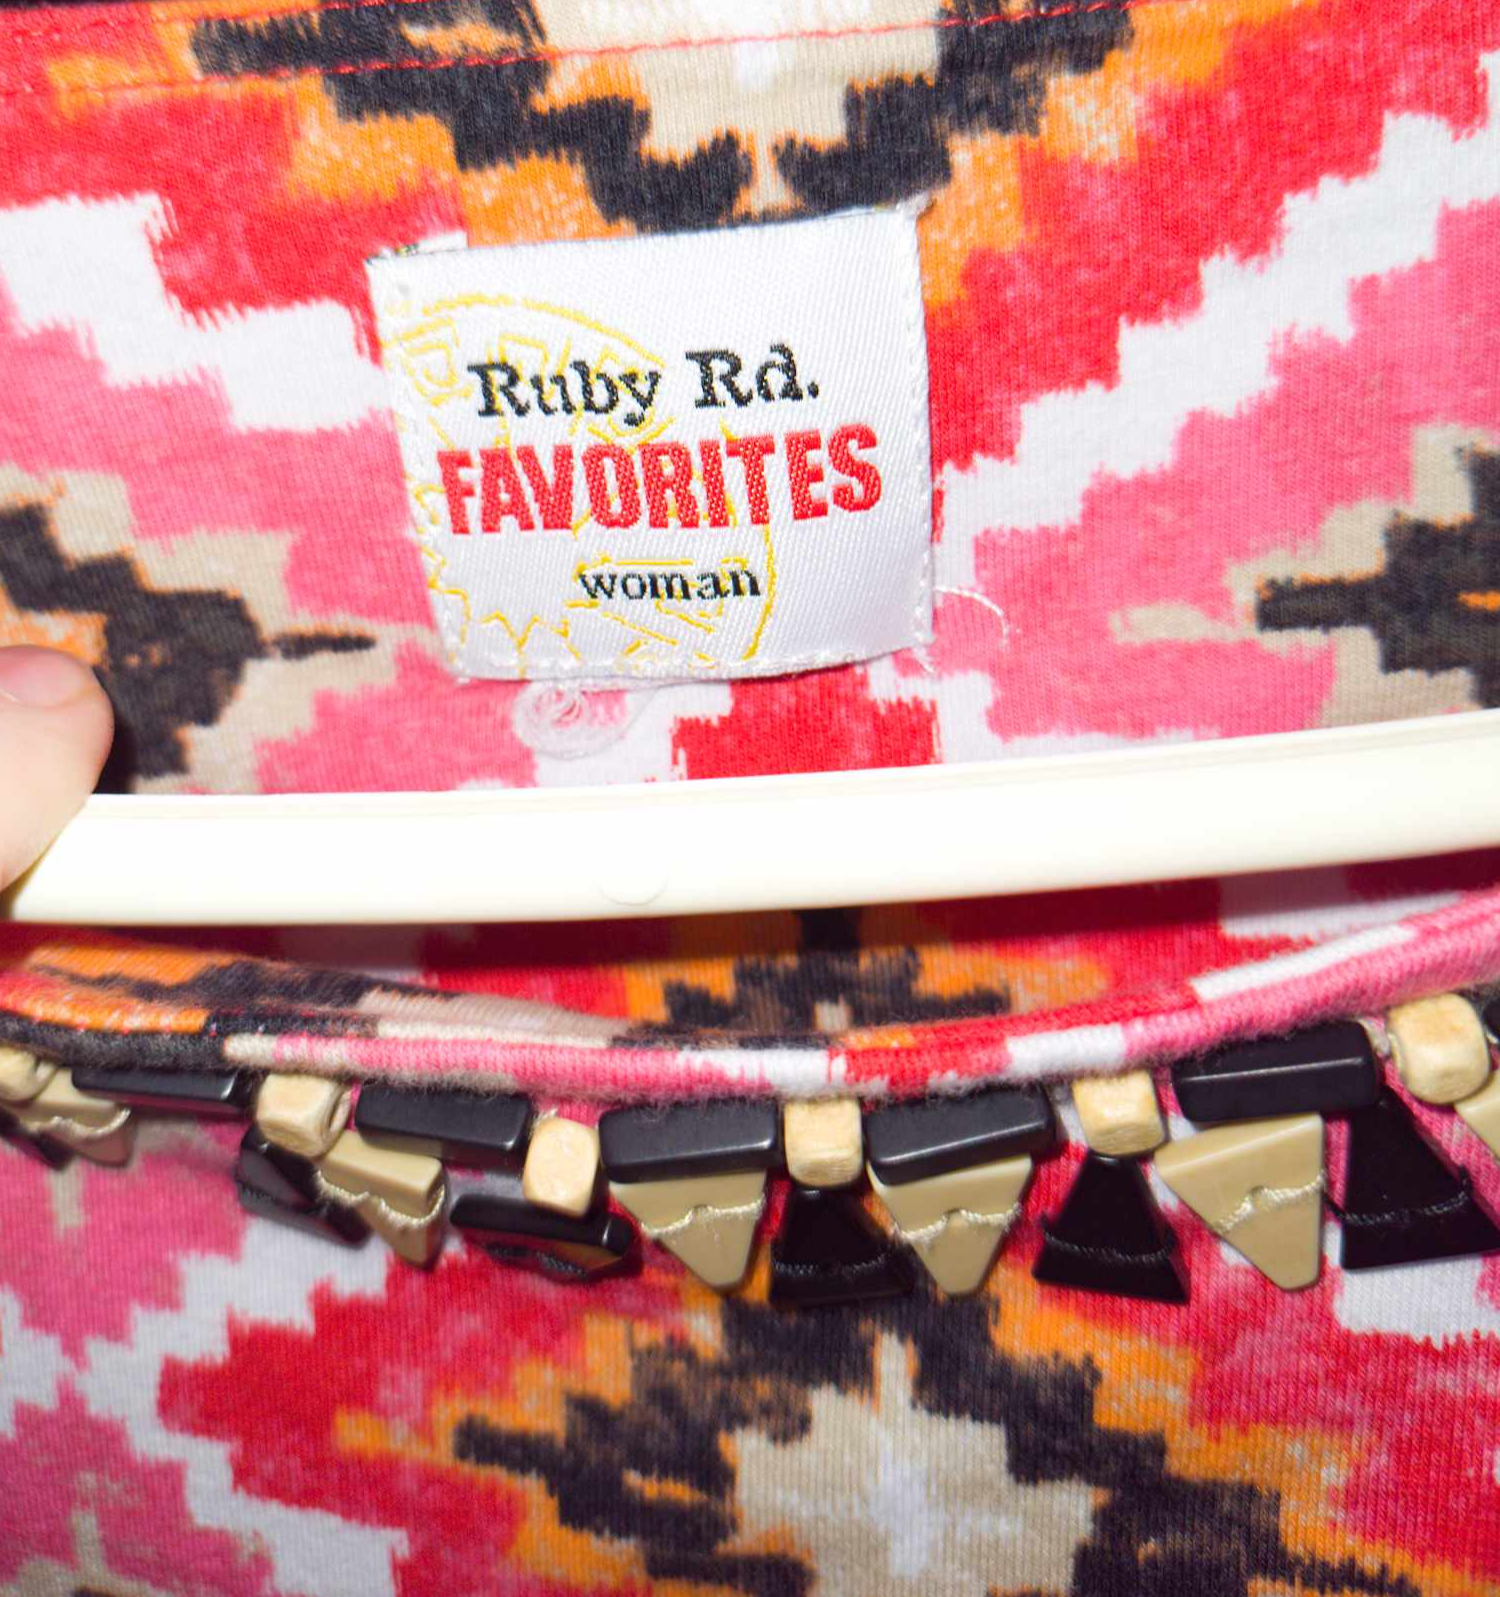 Ruby Rd Favorites Red and Pink Blouse - preowned